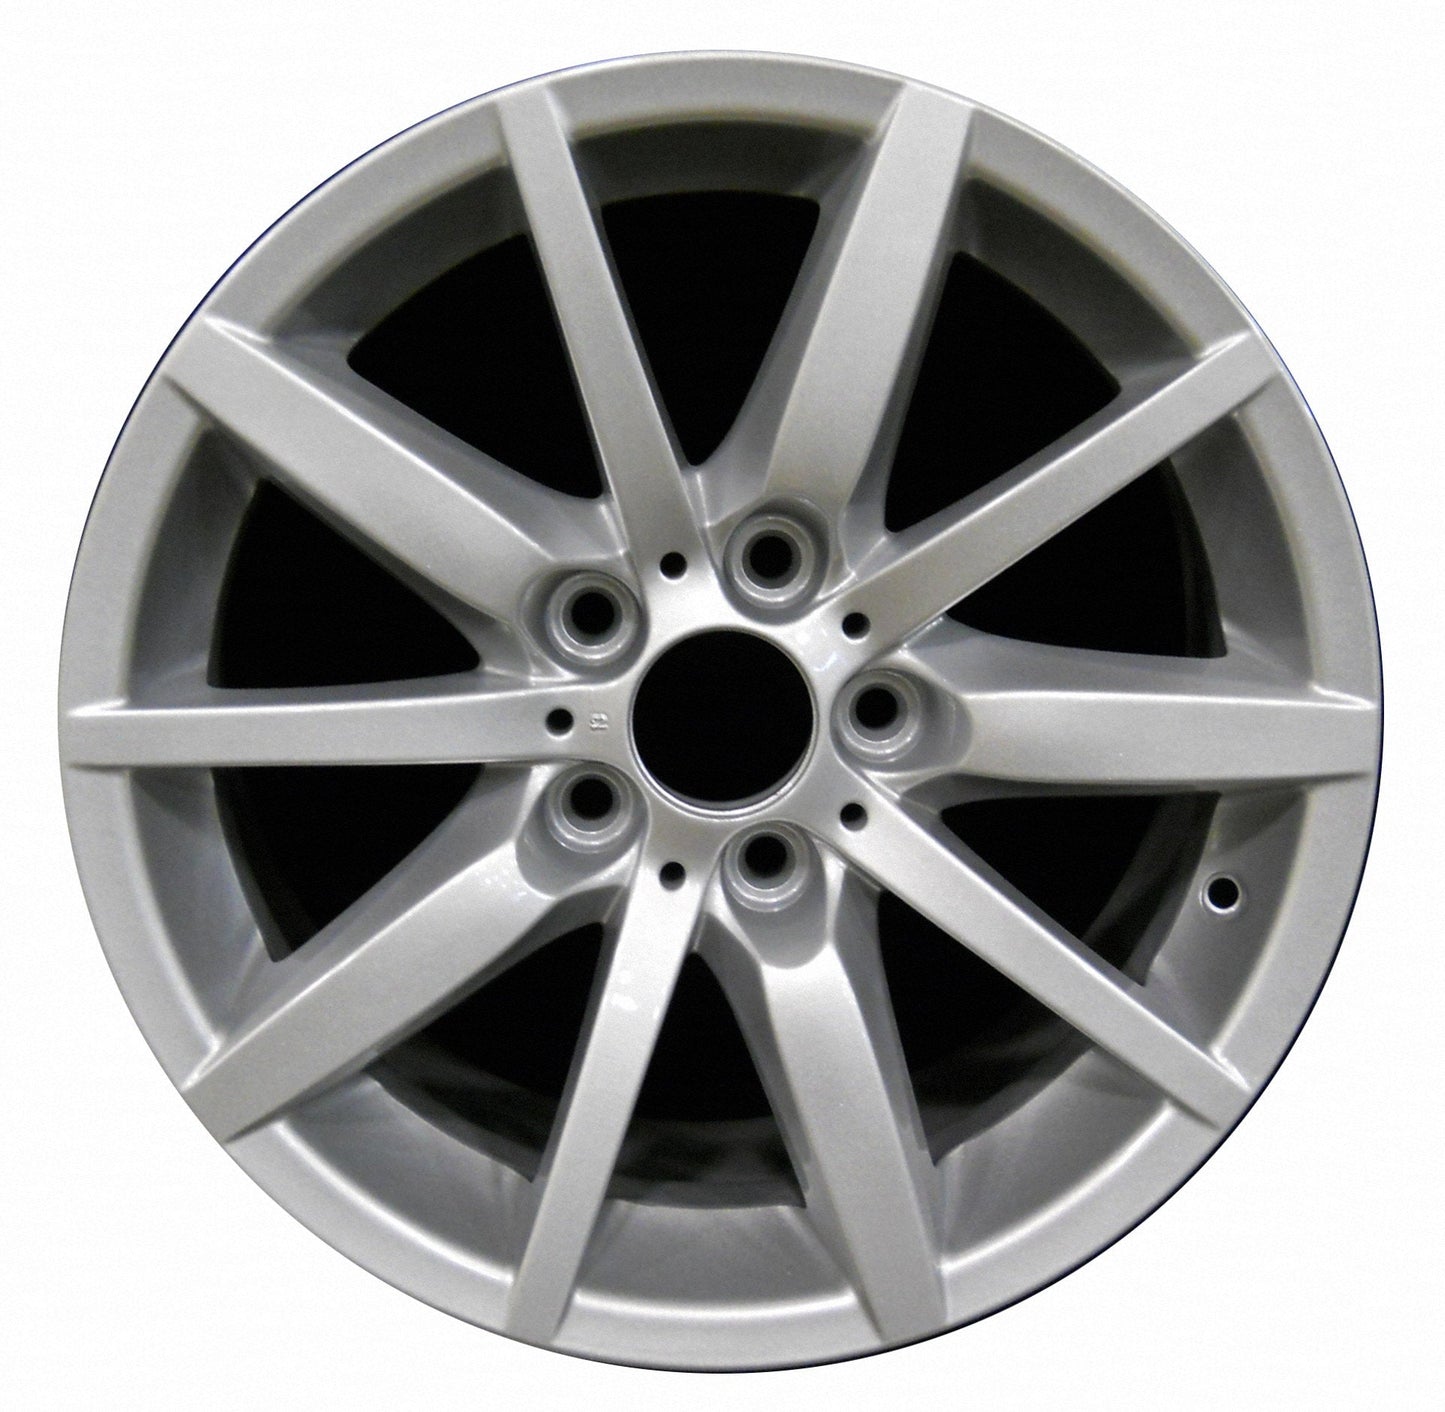 BMW 328i  2008, 2009, 2010, 2011, 2012, 2013 Factory OEM Car Wheel Size 17x8 Alloy WAO.71316FT.PS14.FF